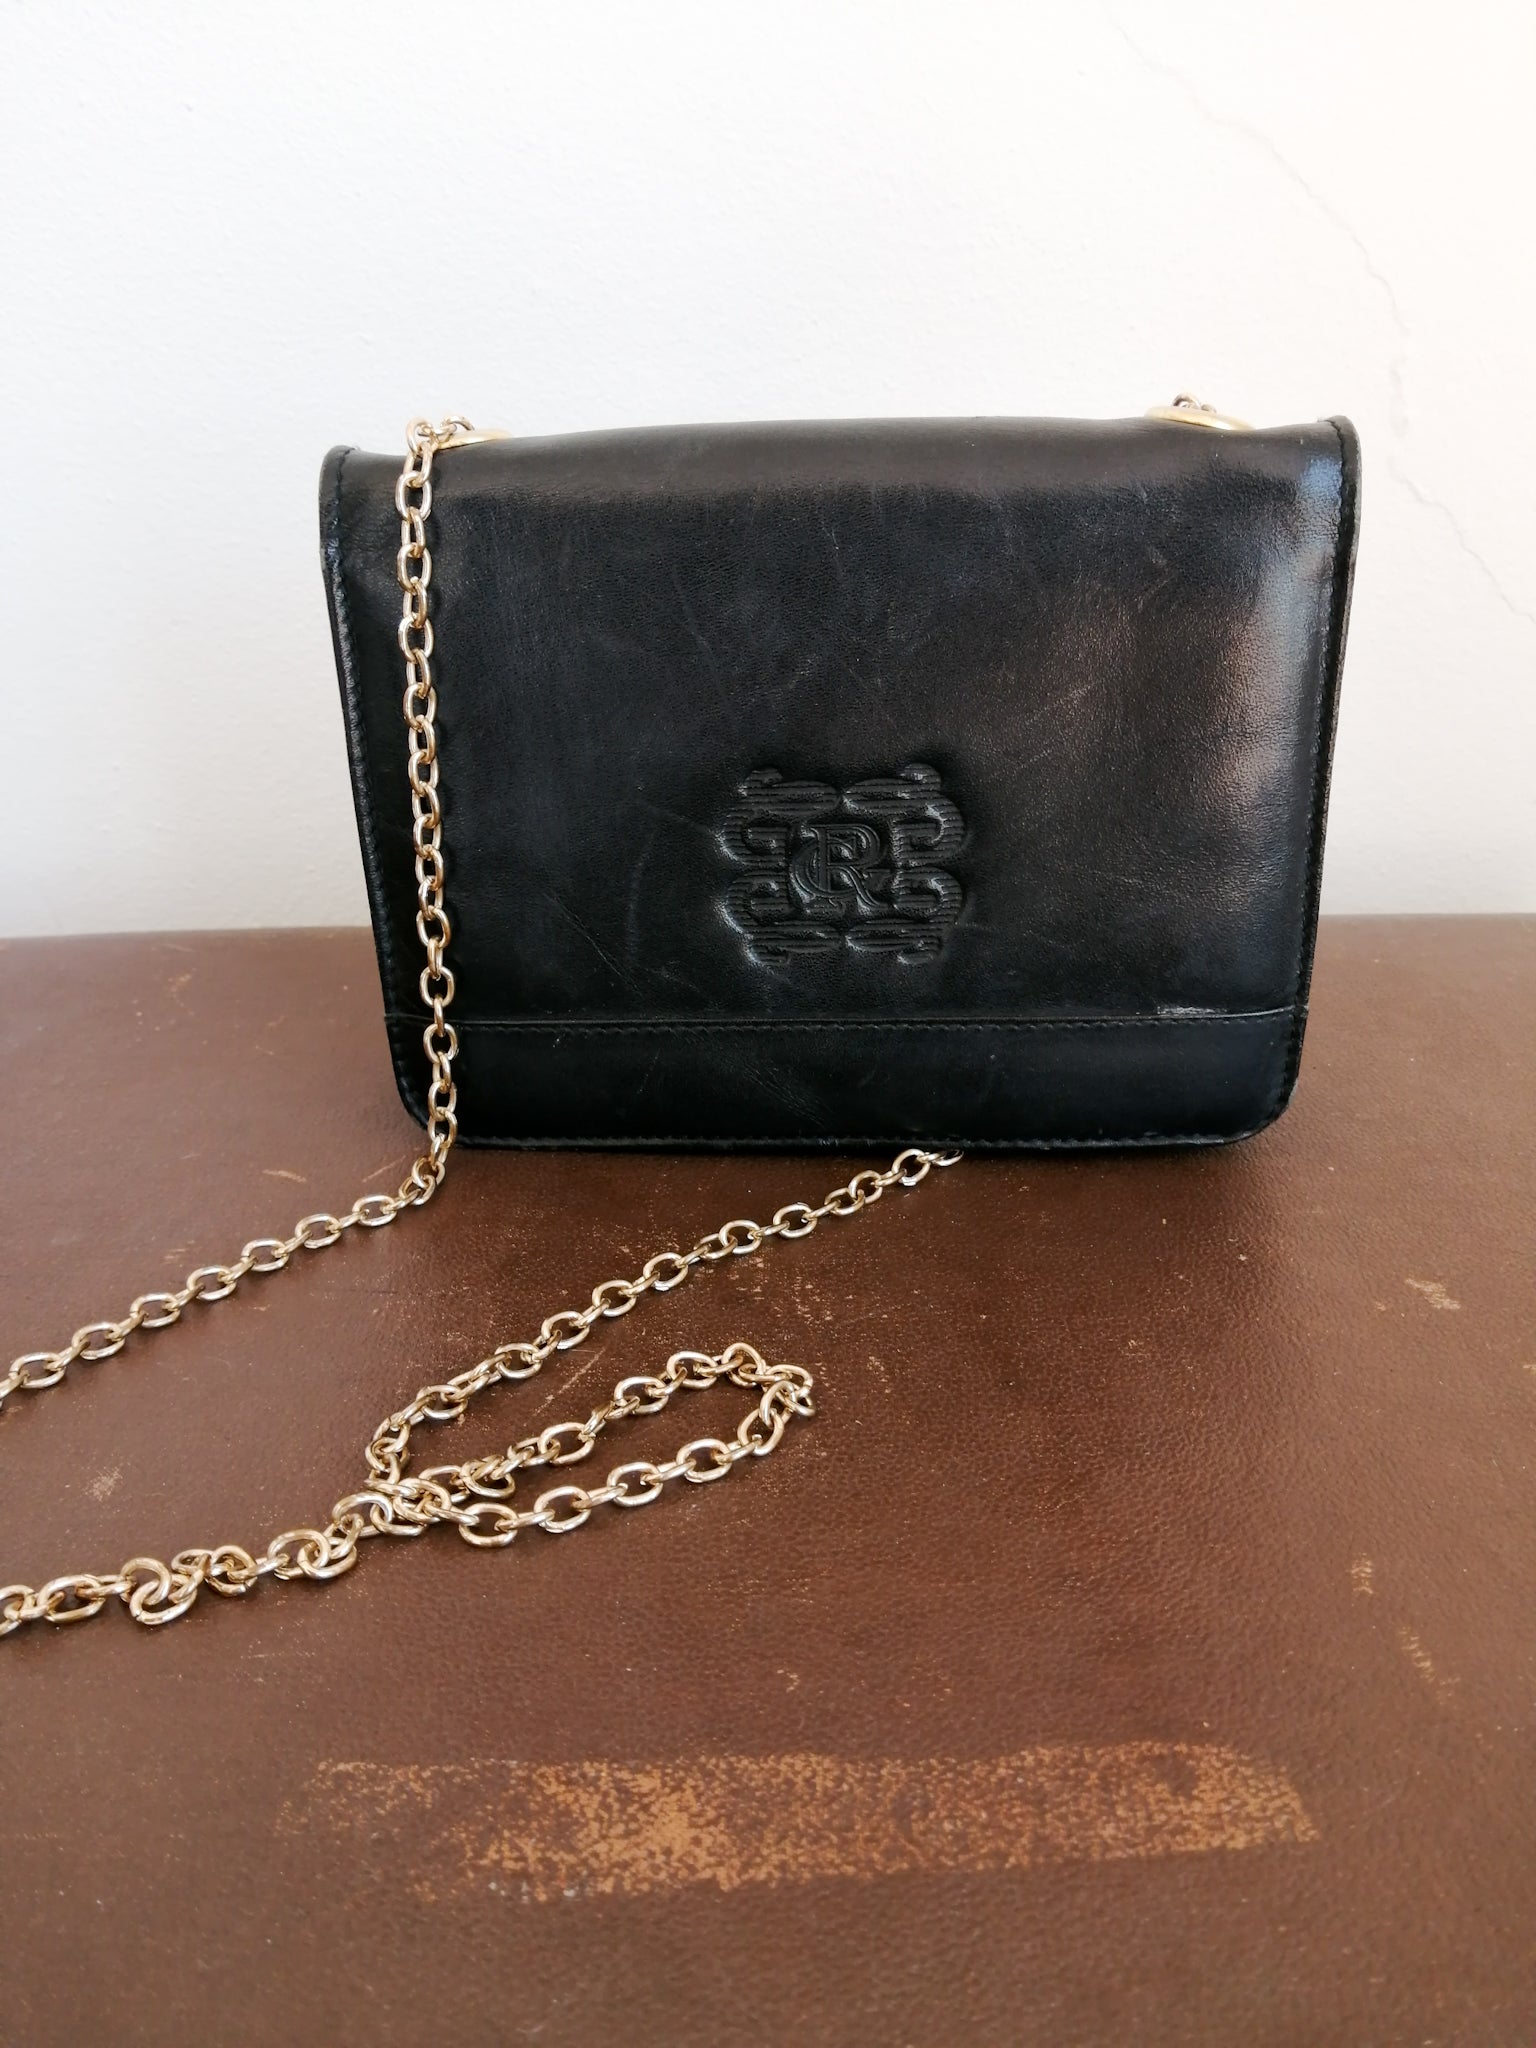 Black sling bag with gold chain